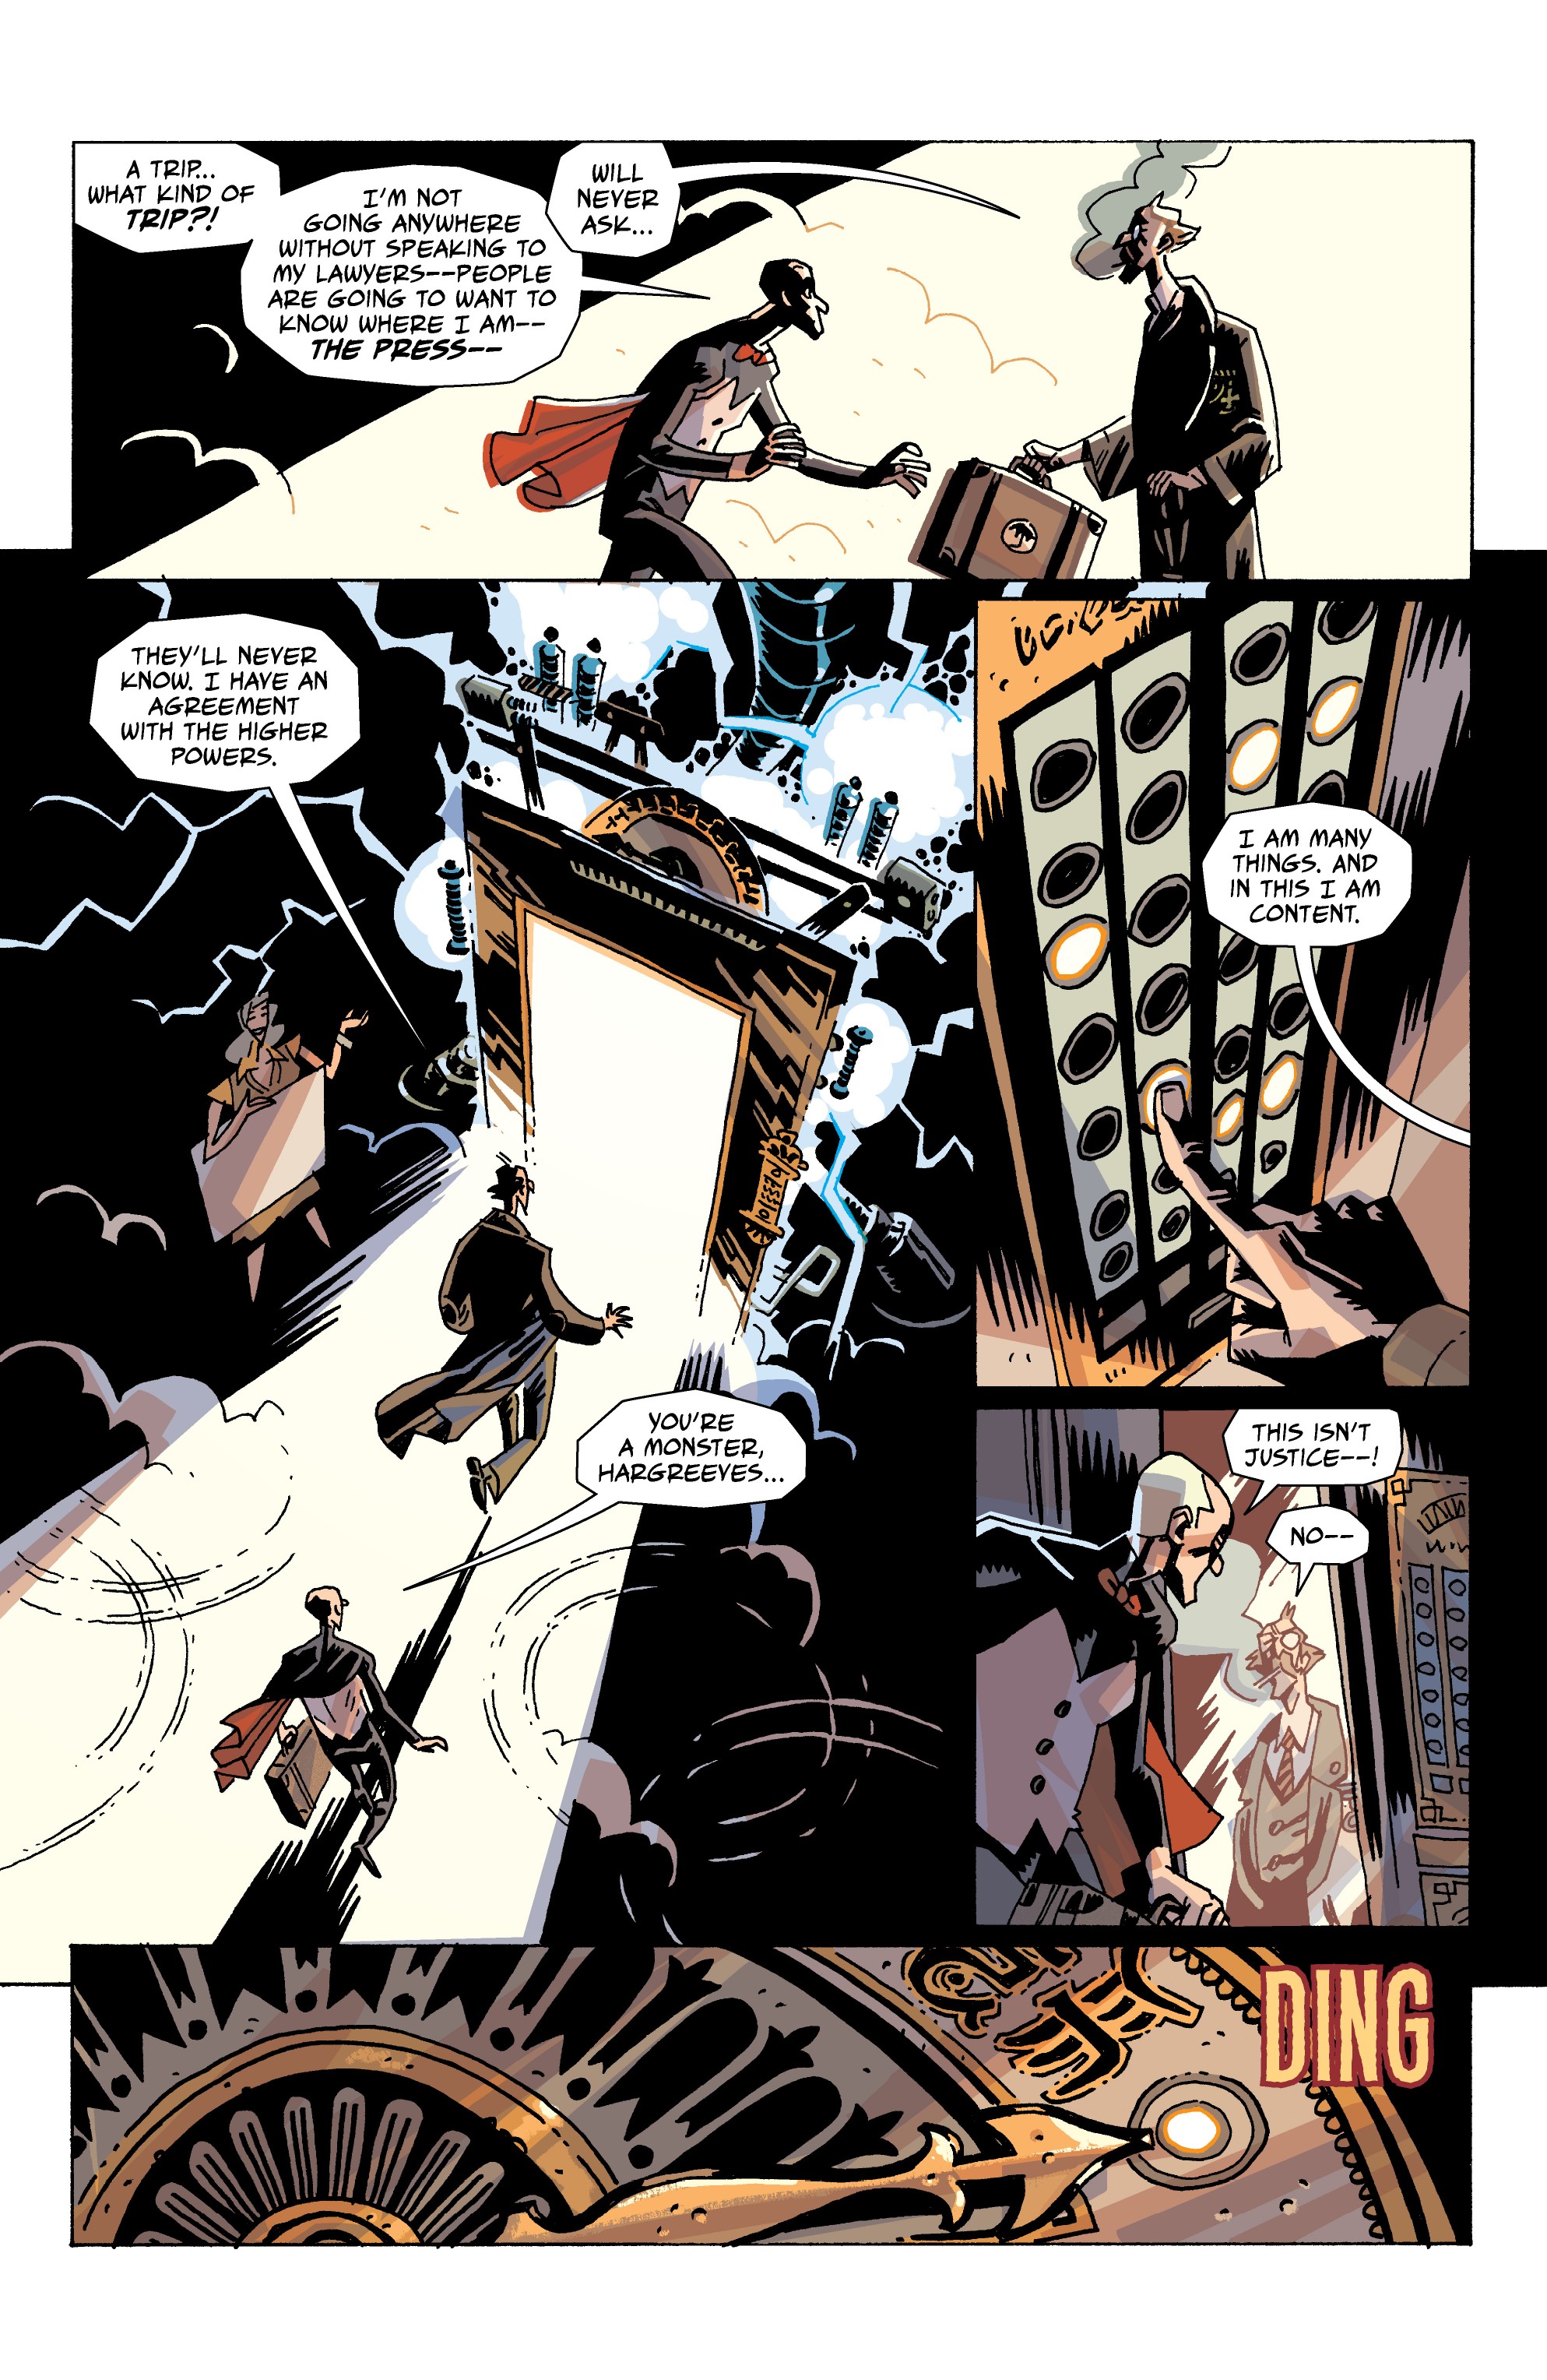 Umbrella Academy: Hotel Oblivion (2018-): Chapter 1 - Page 4